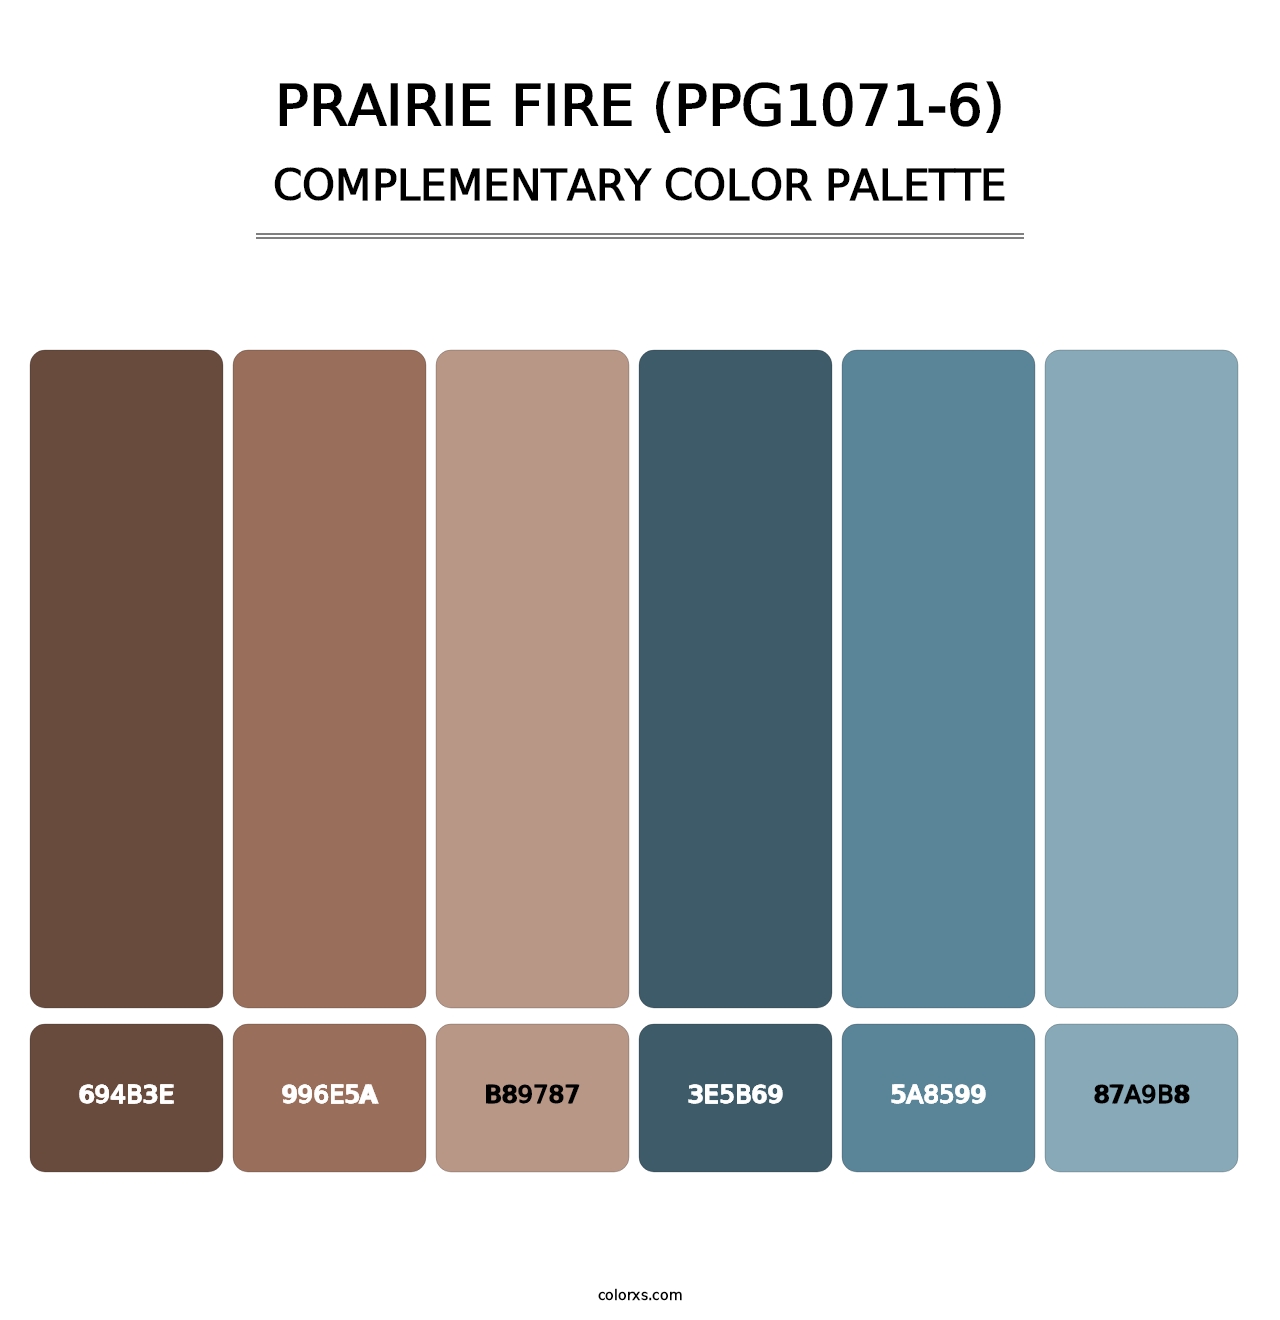 Prairie Fire (PPG1071-6) - Complementary Color Palette